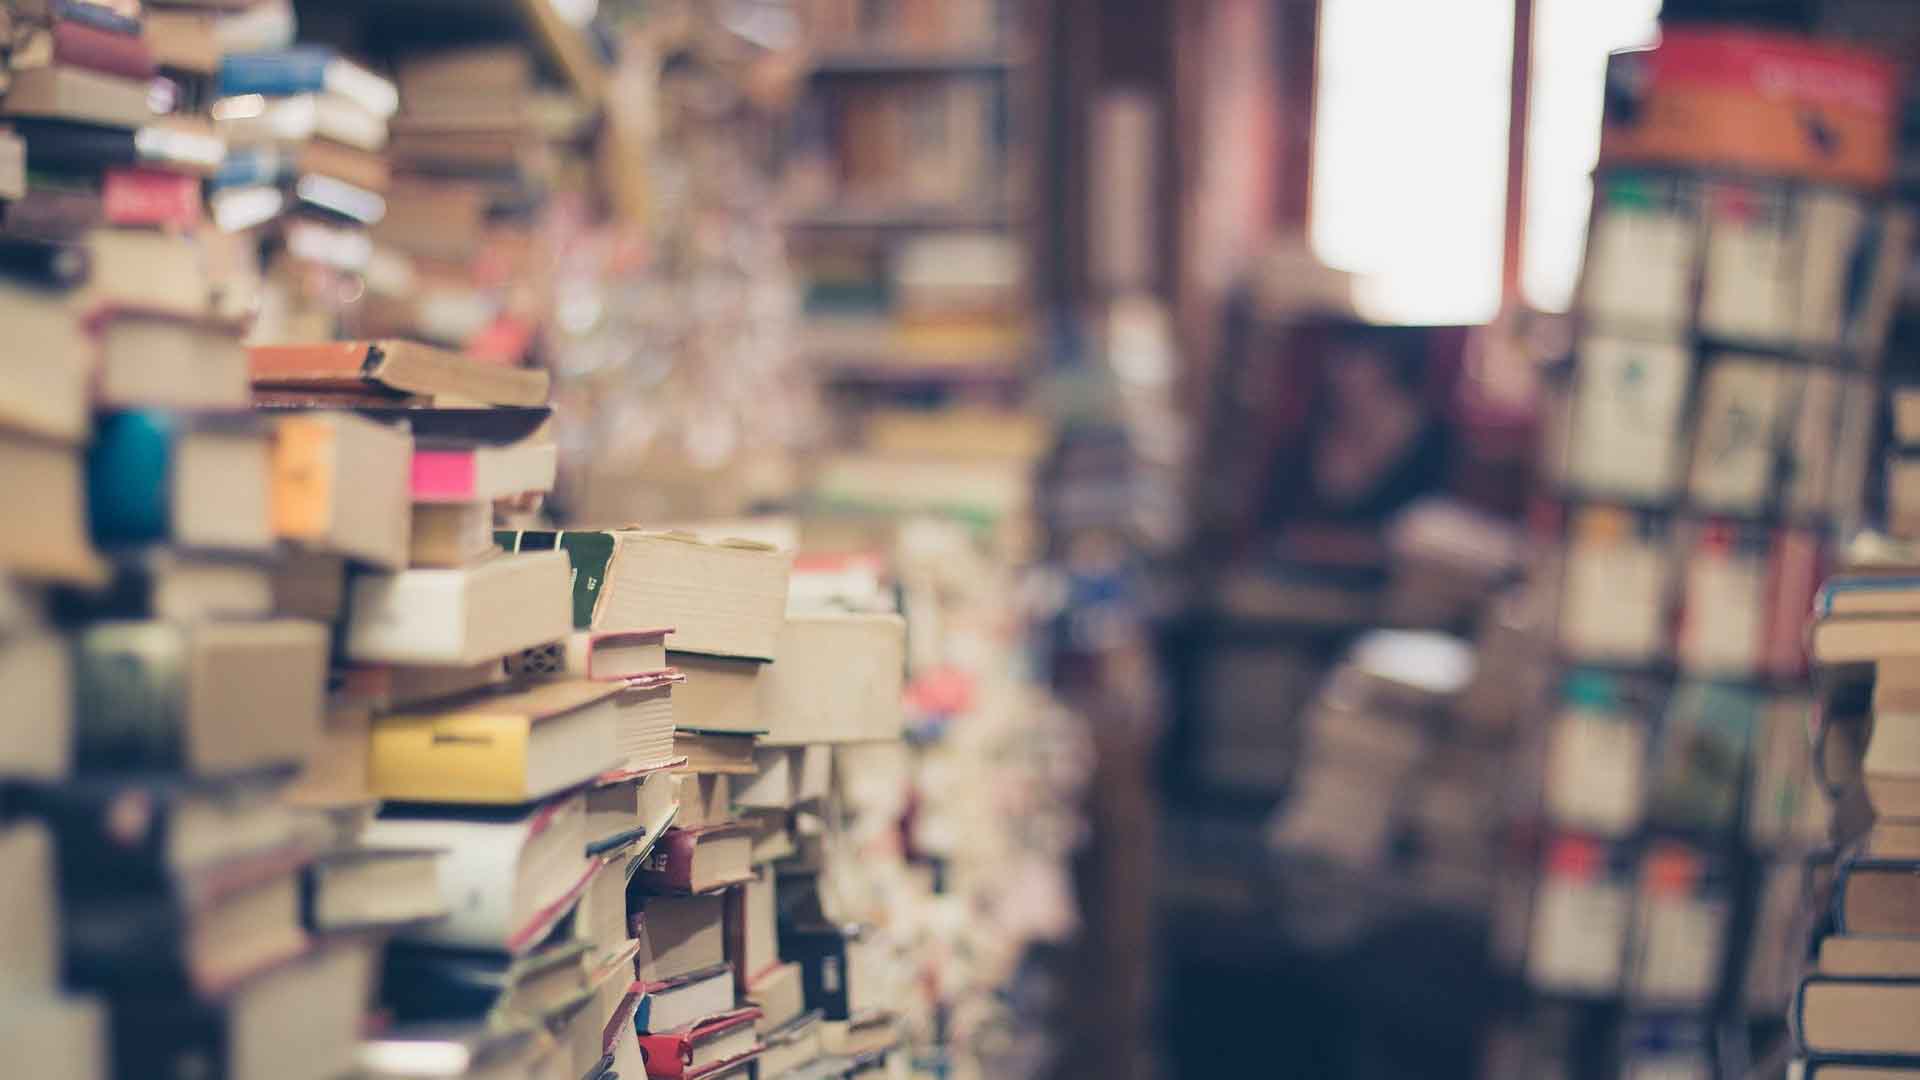 Books stacked in a bookshop